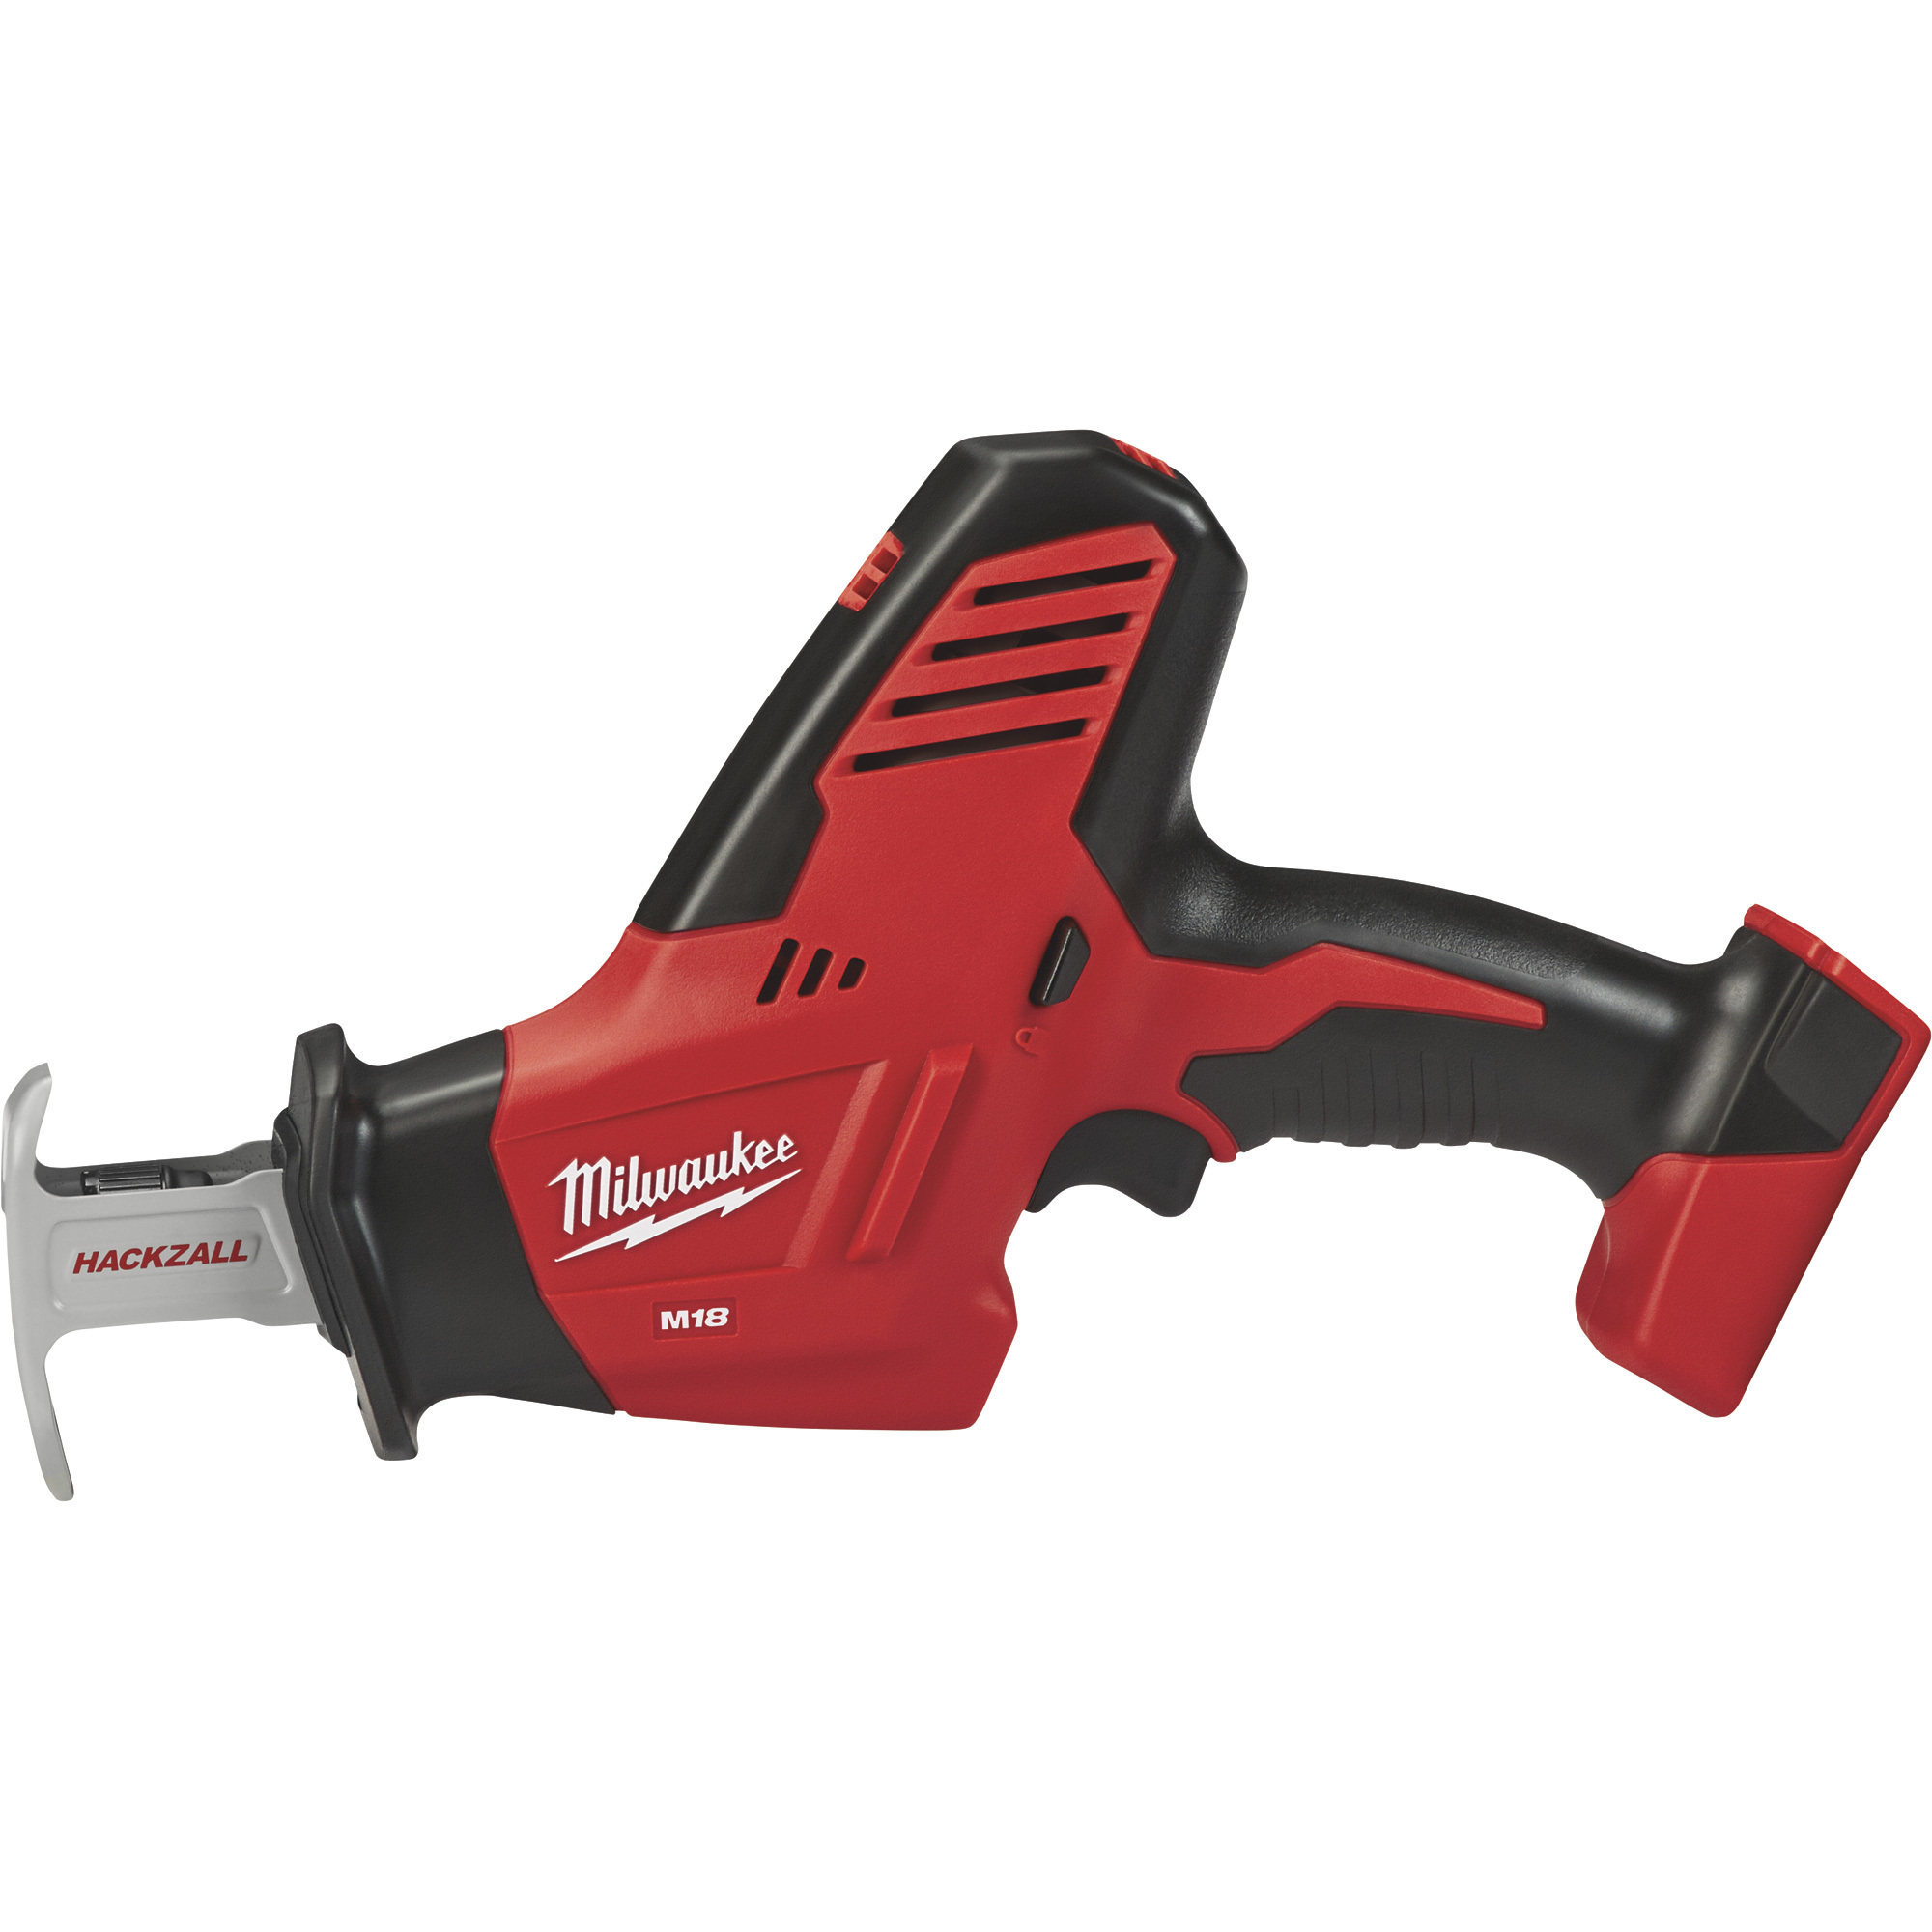 Milwaukee M18 18V Cordless Hackzall Reciprocating Saw, Tool Only, Model 2625-20